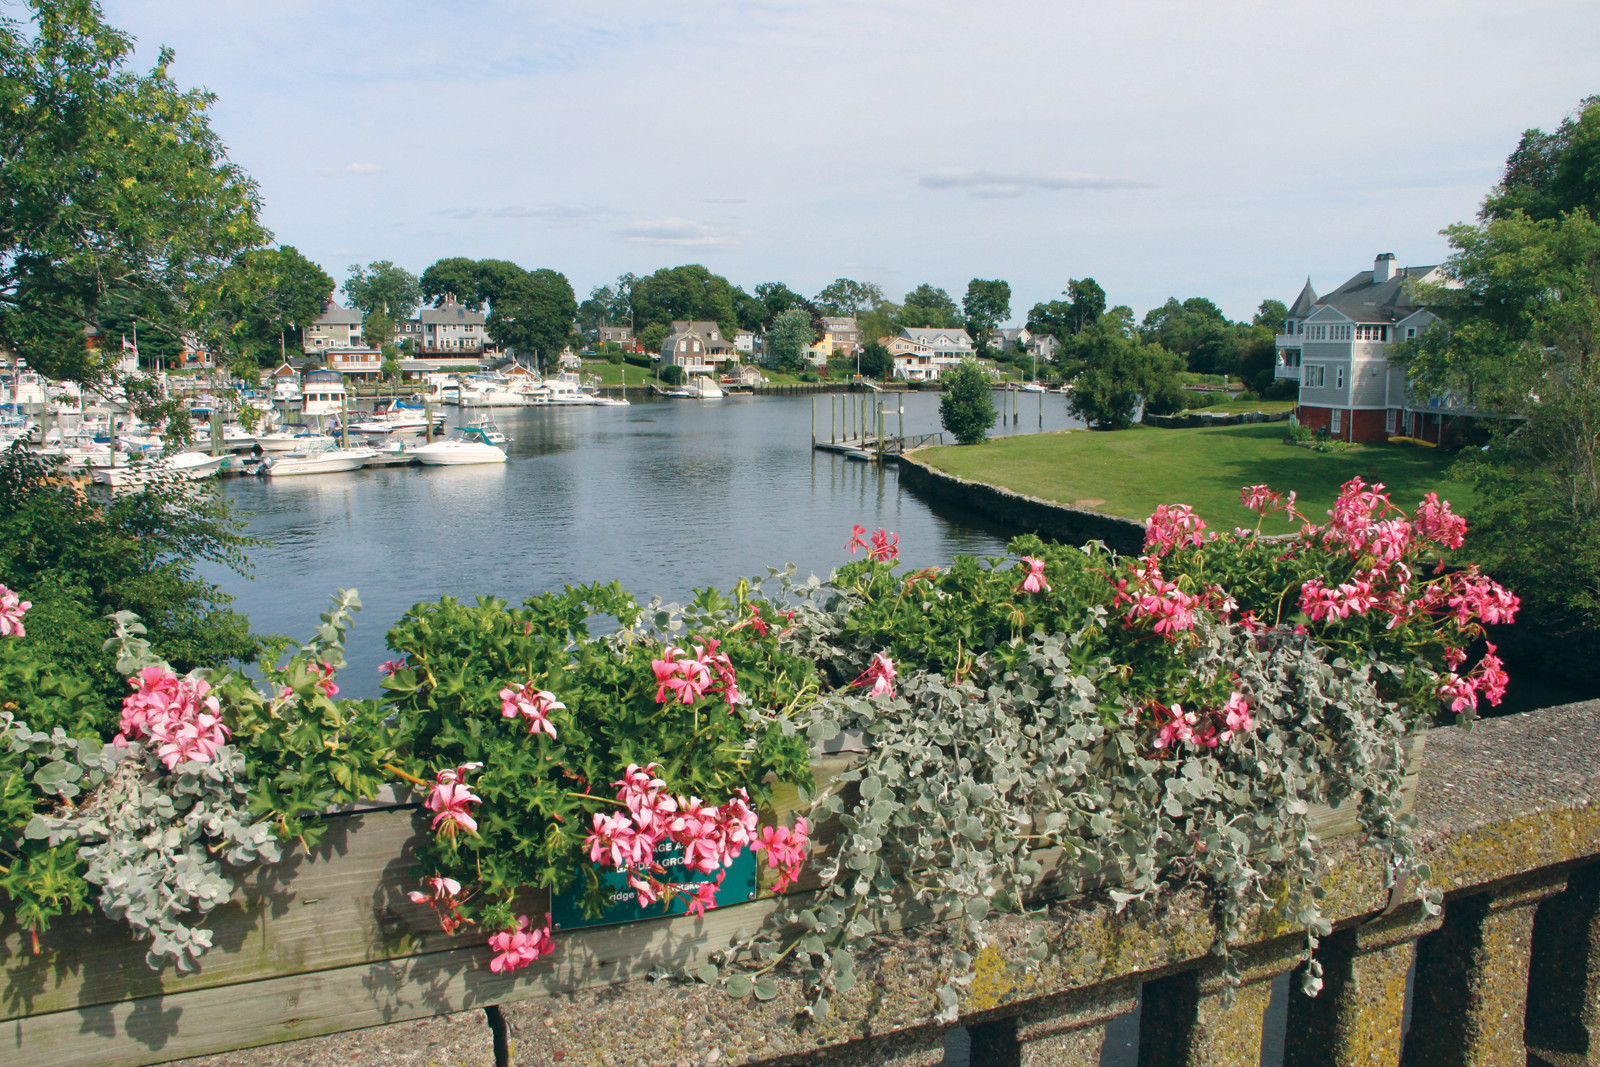 LINKING TWO MUNICIPALITIES: It’s Pawtuxet no matter what side of the bridge you’re standing on.